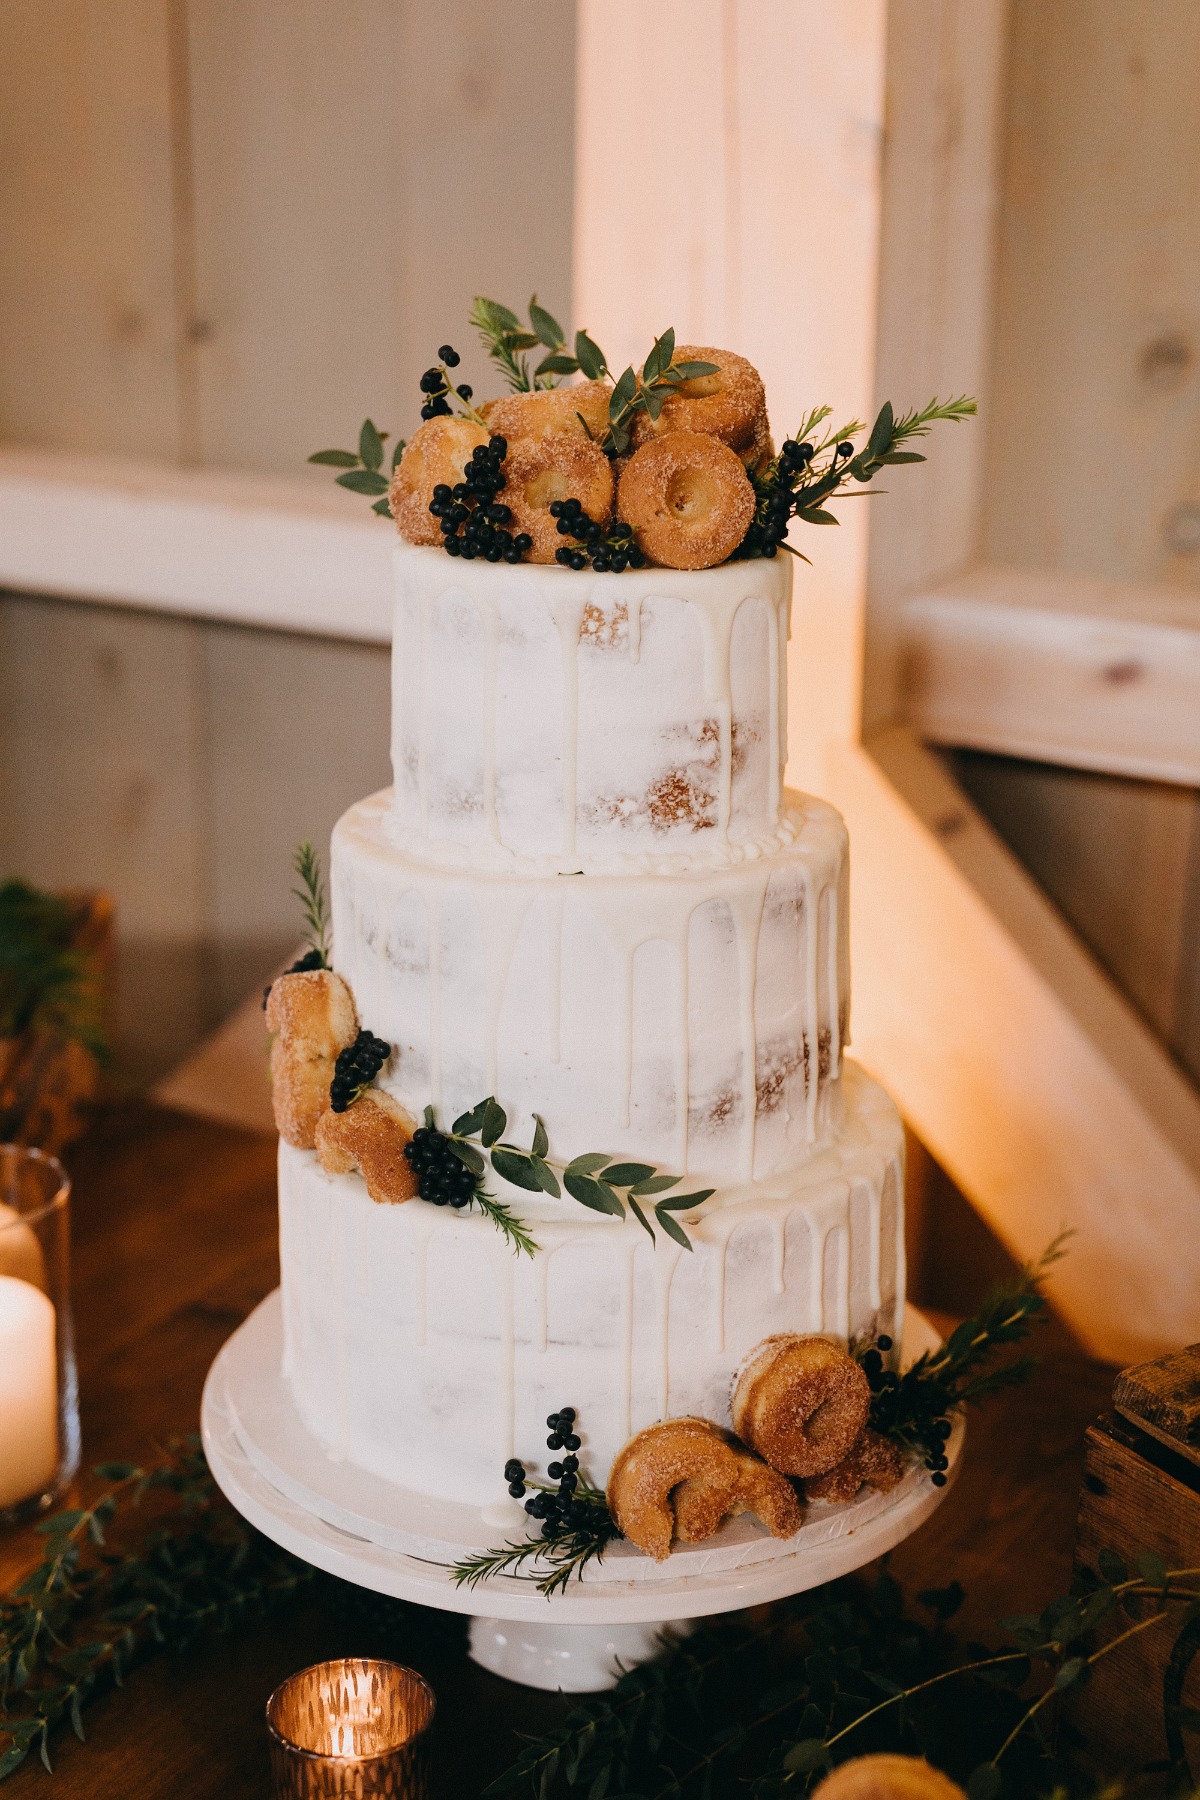 The True Meaning of Maine: Coasts, Barns, and Bohemian Inspo Stun at this Autumn Wedding